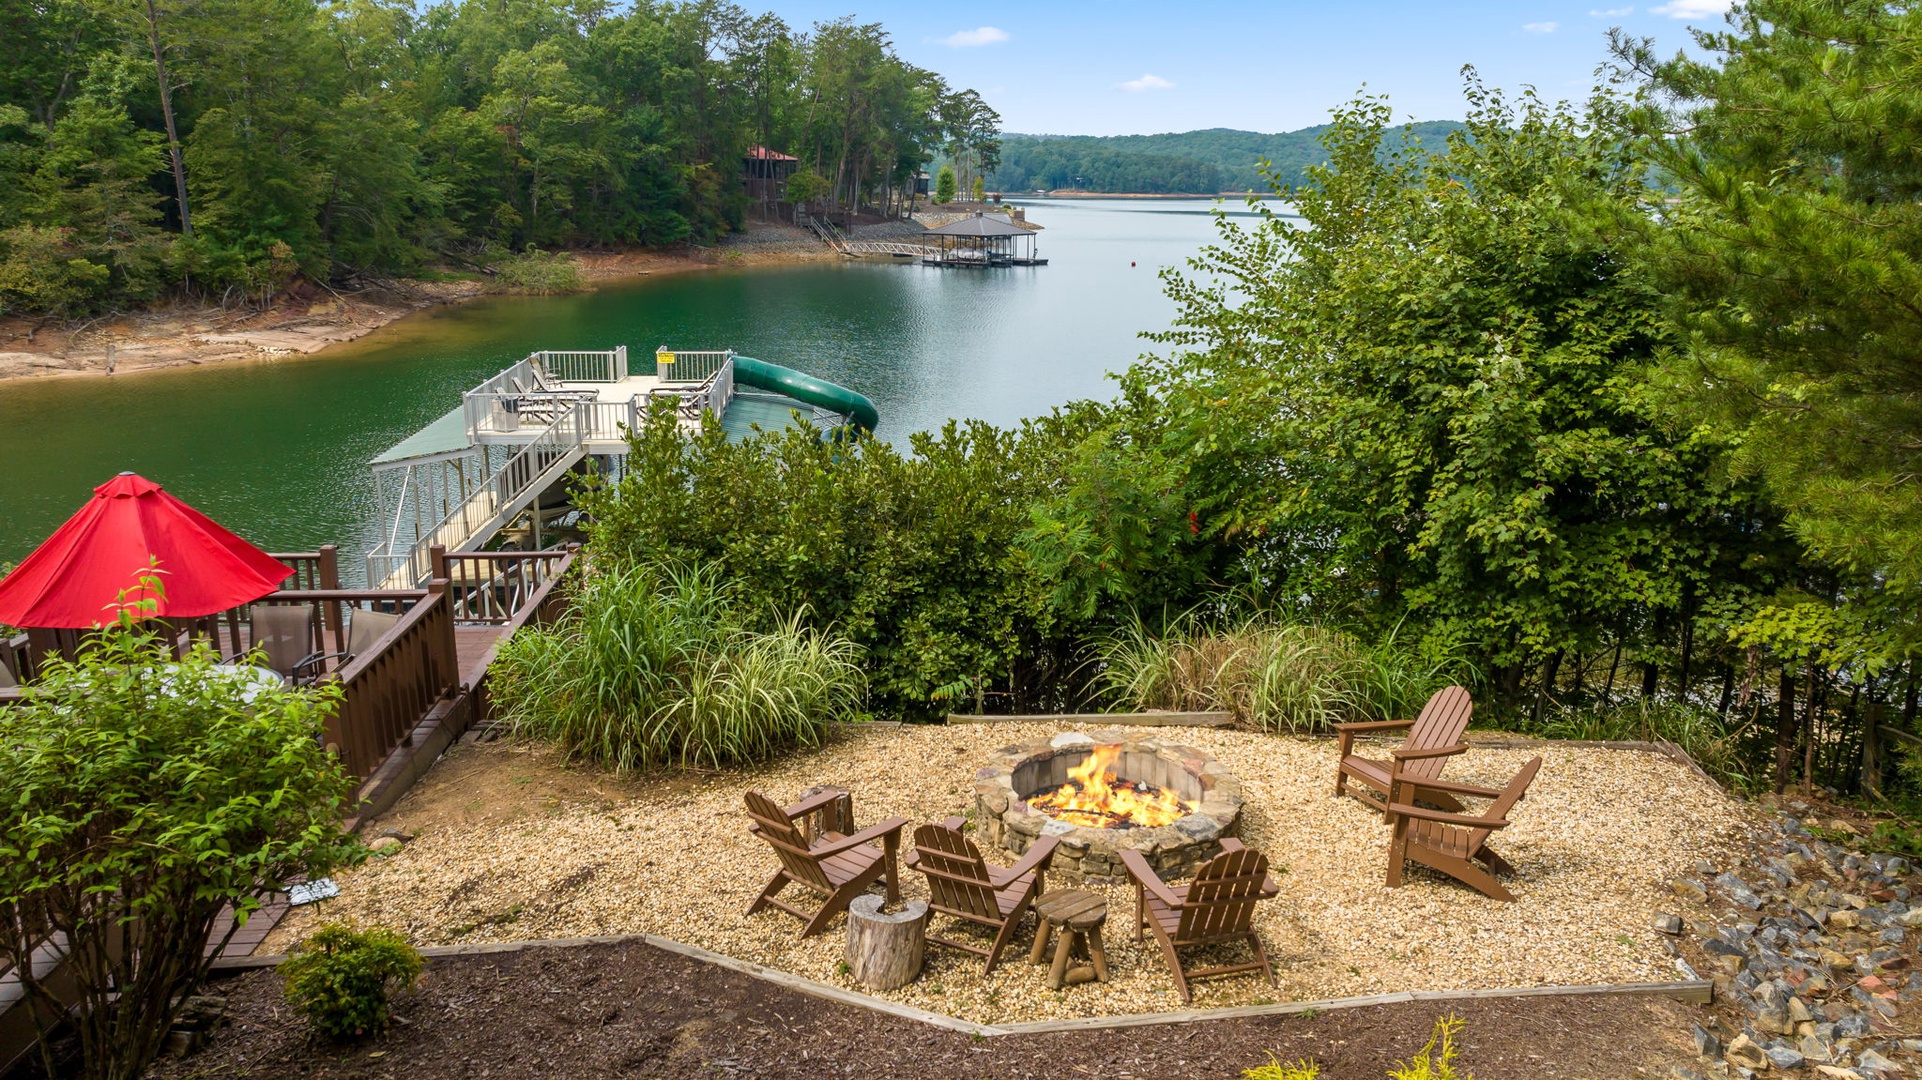 Fire Pit and Deck Of Vacation Rental Medley Sunset Cove